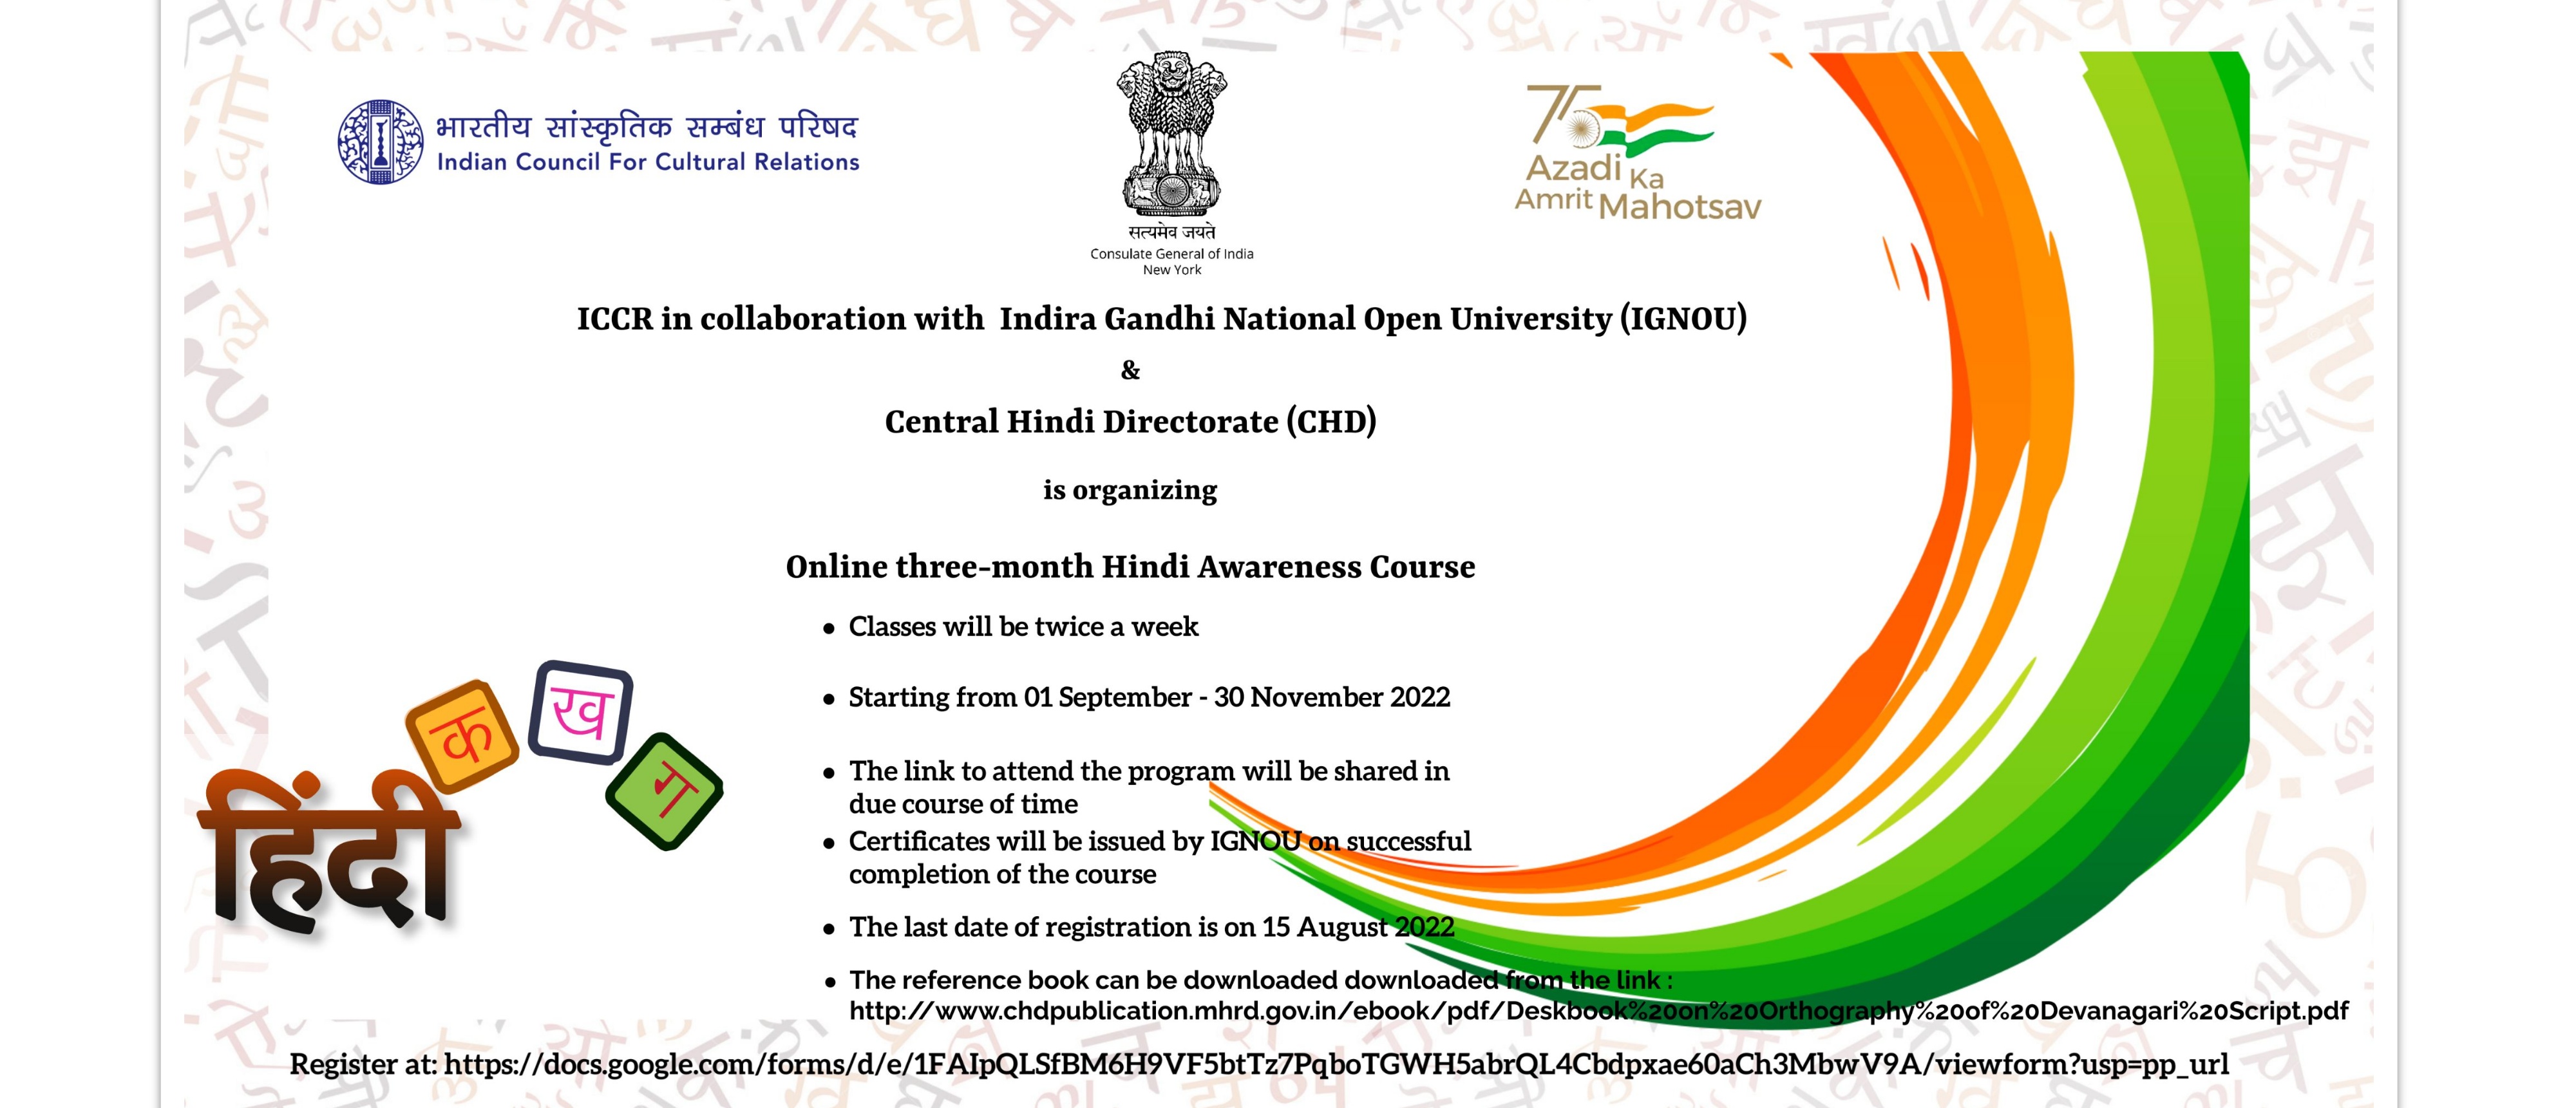  Online three-month Hindi Awareness Course